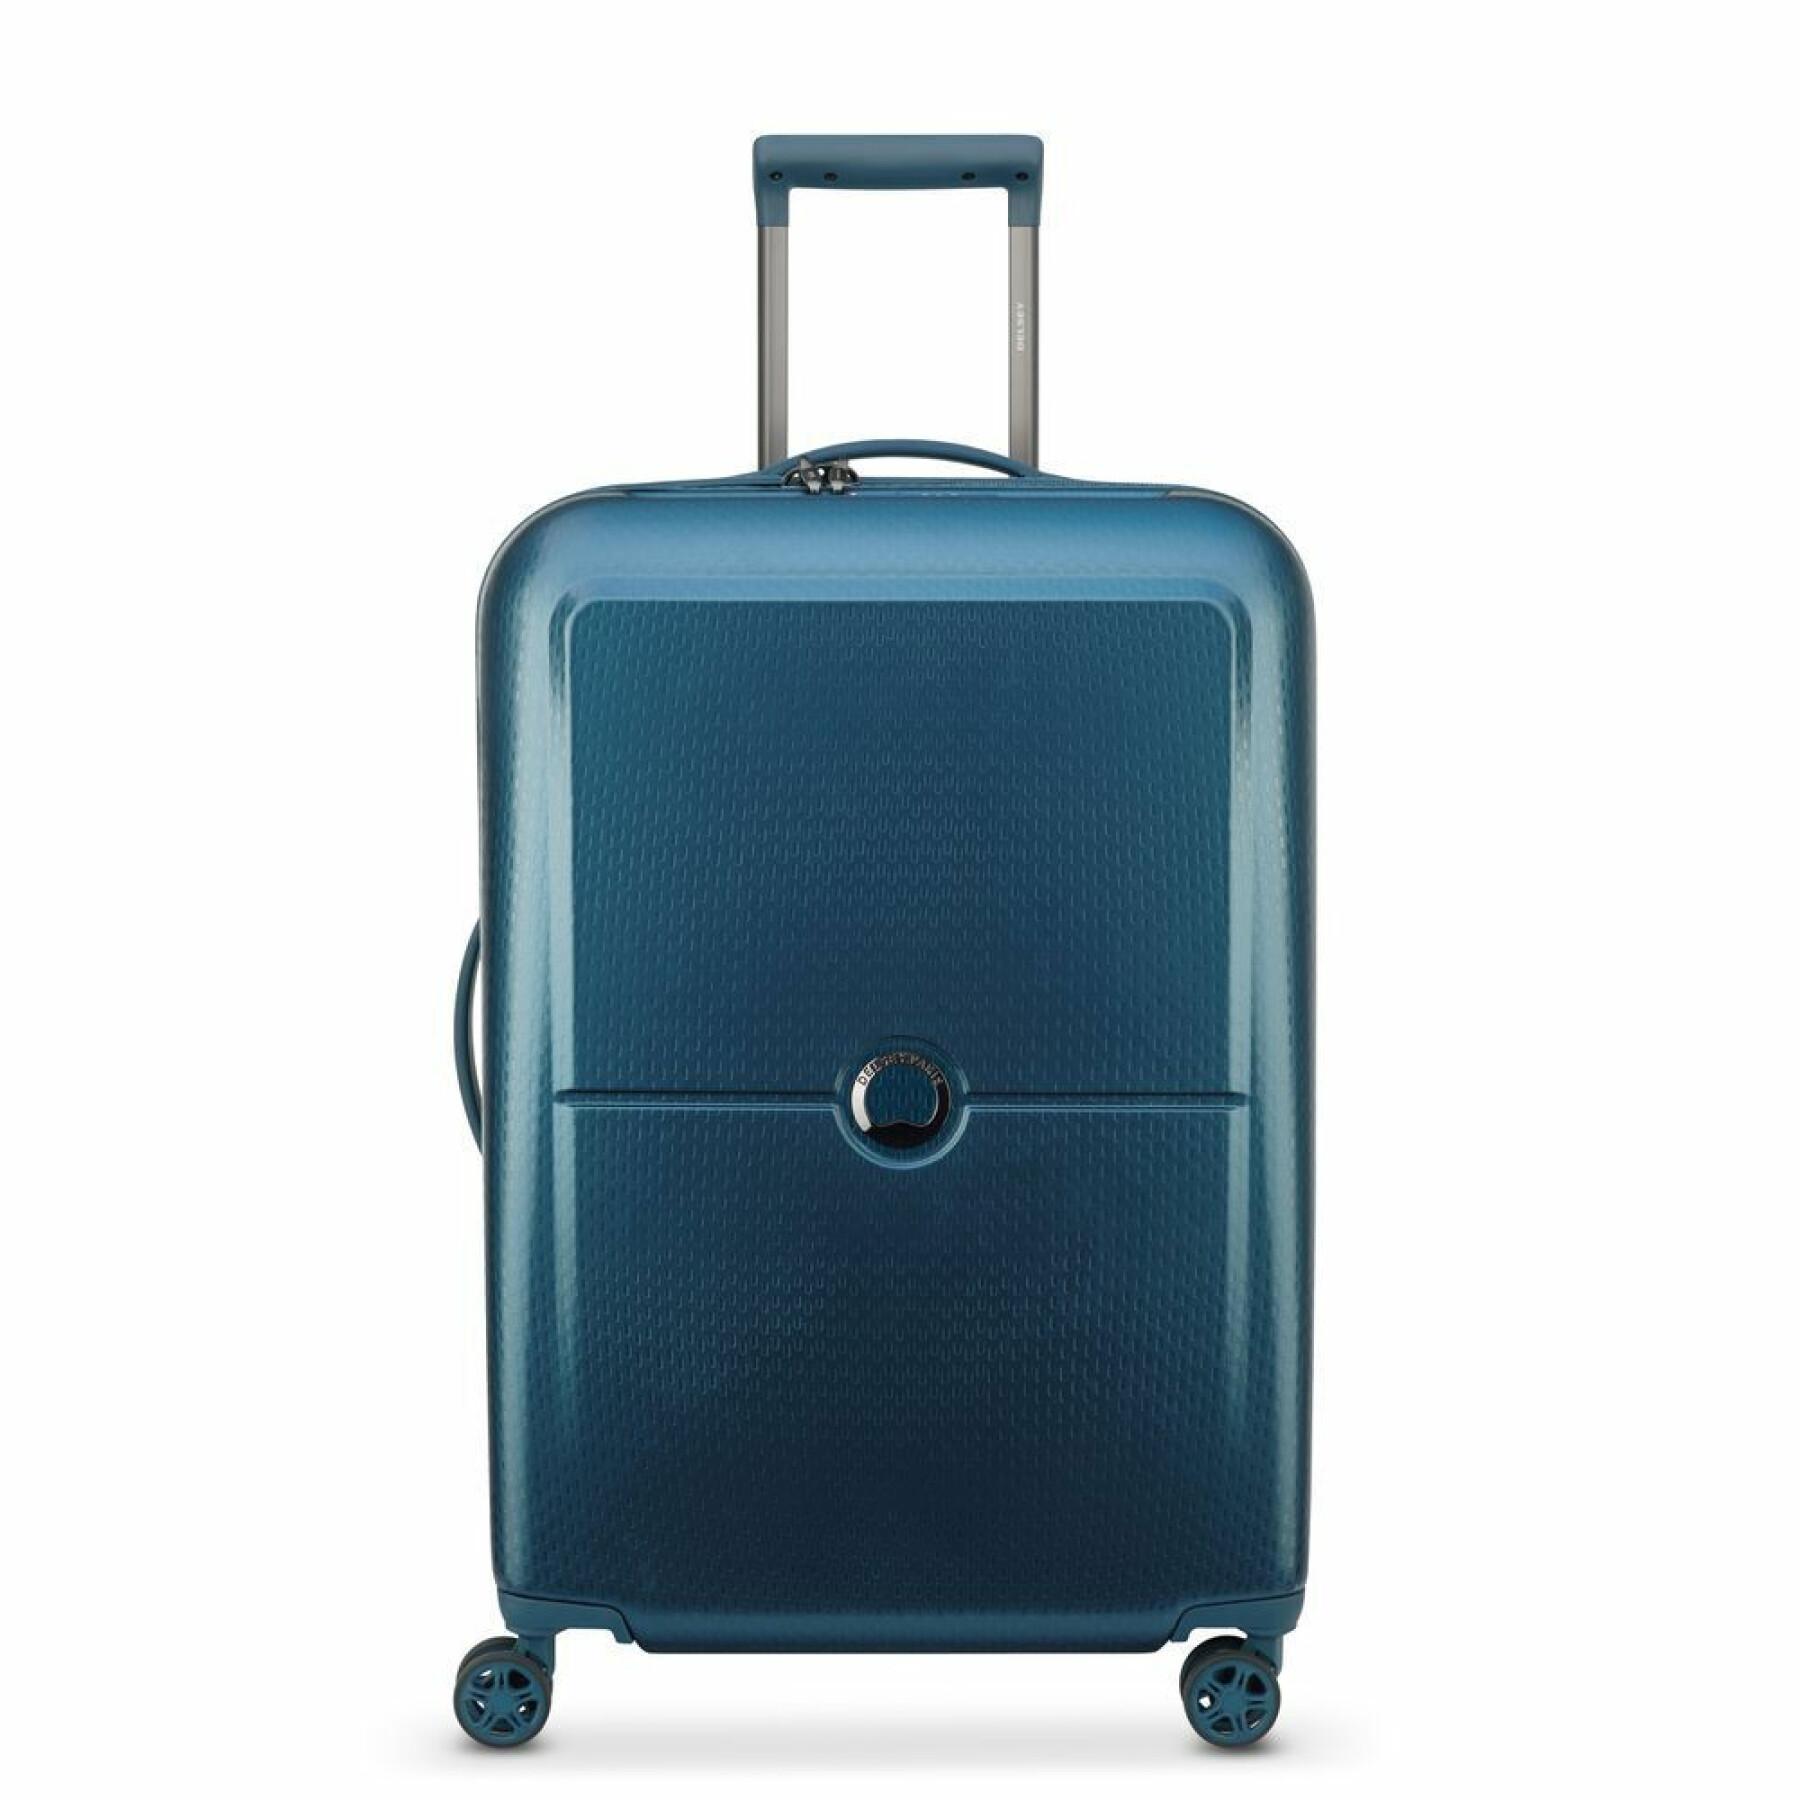 Valise trolley 4 doubles roues Delsey Turenne 65 cm